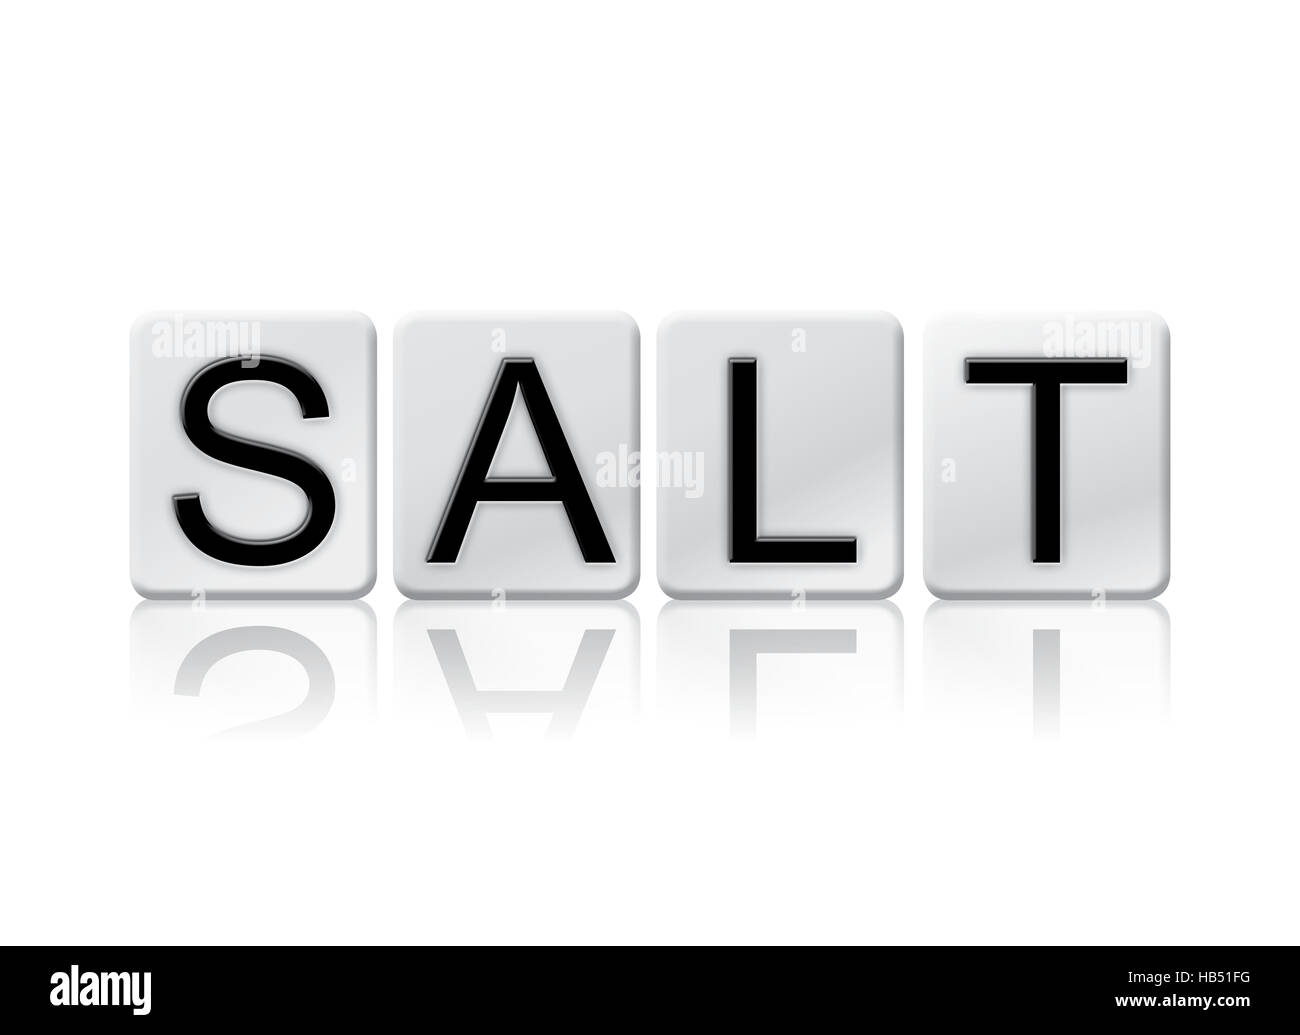 The word 'Salt' written in tile letters isolated on a white background. Stock Photo